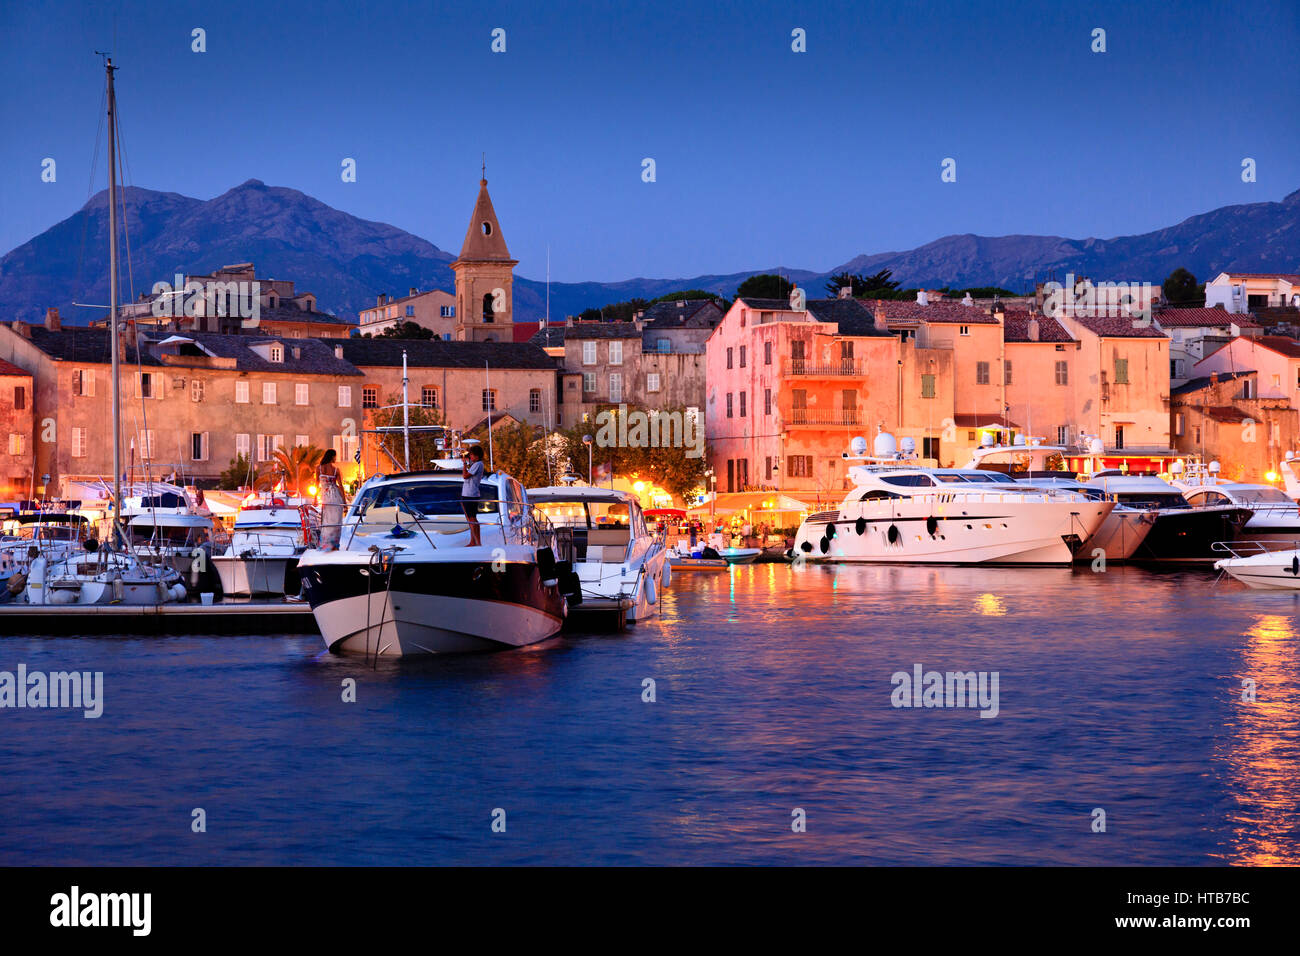 Night view of St Florent harbour, Corsica, France Stock Photo